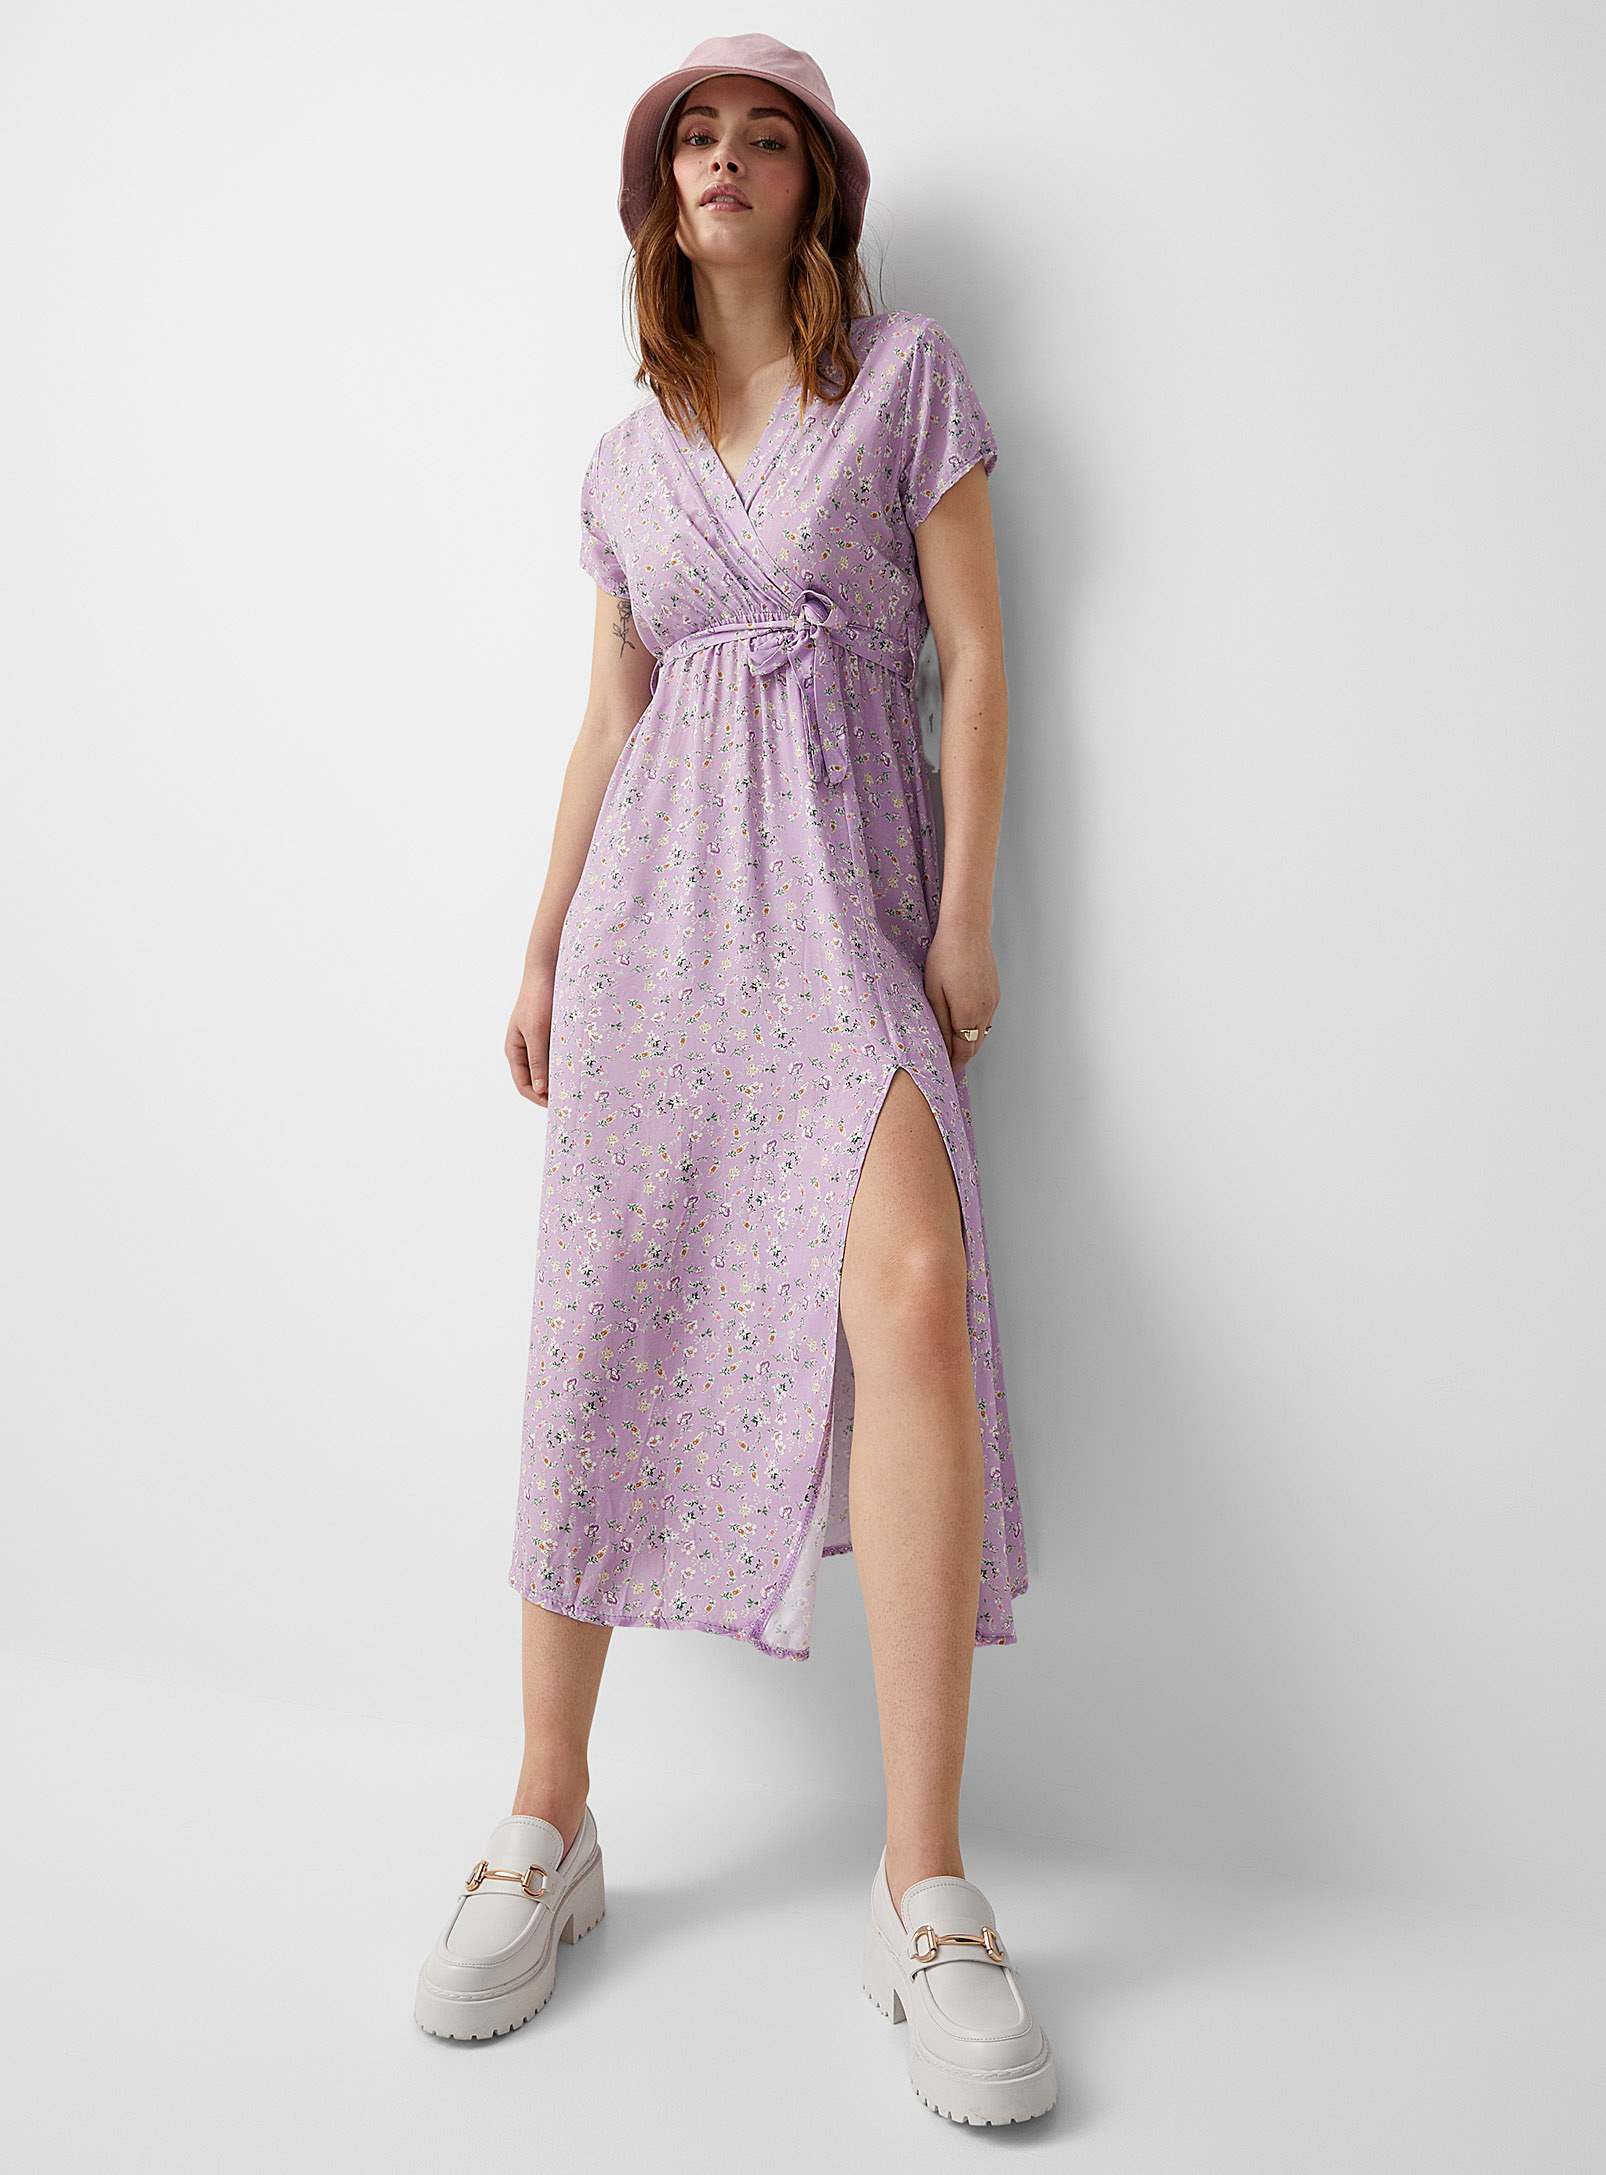 A person wearing the dress with loafers